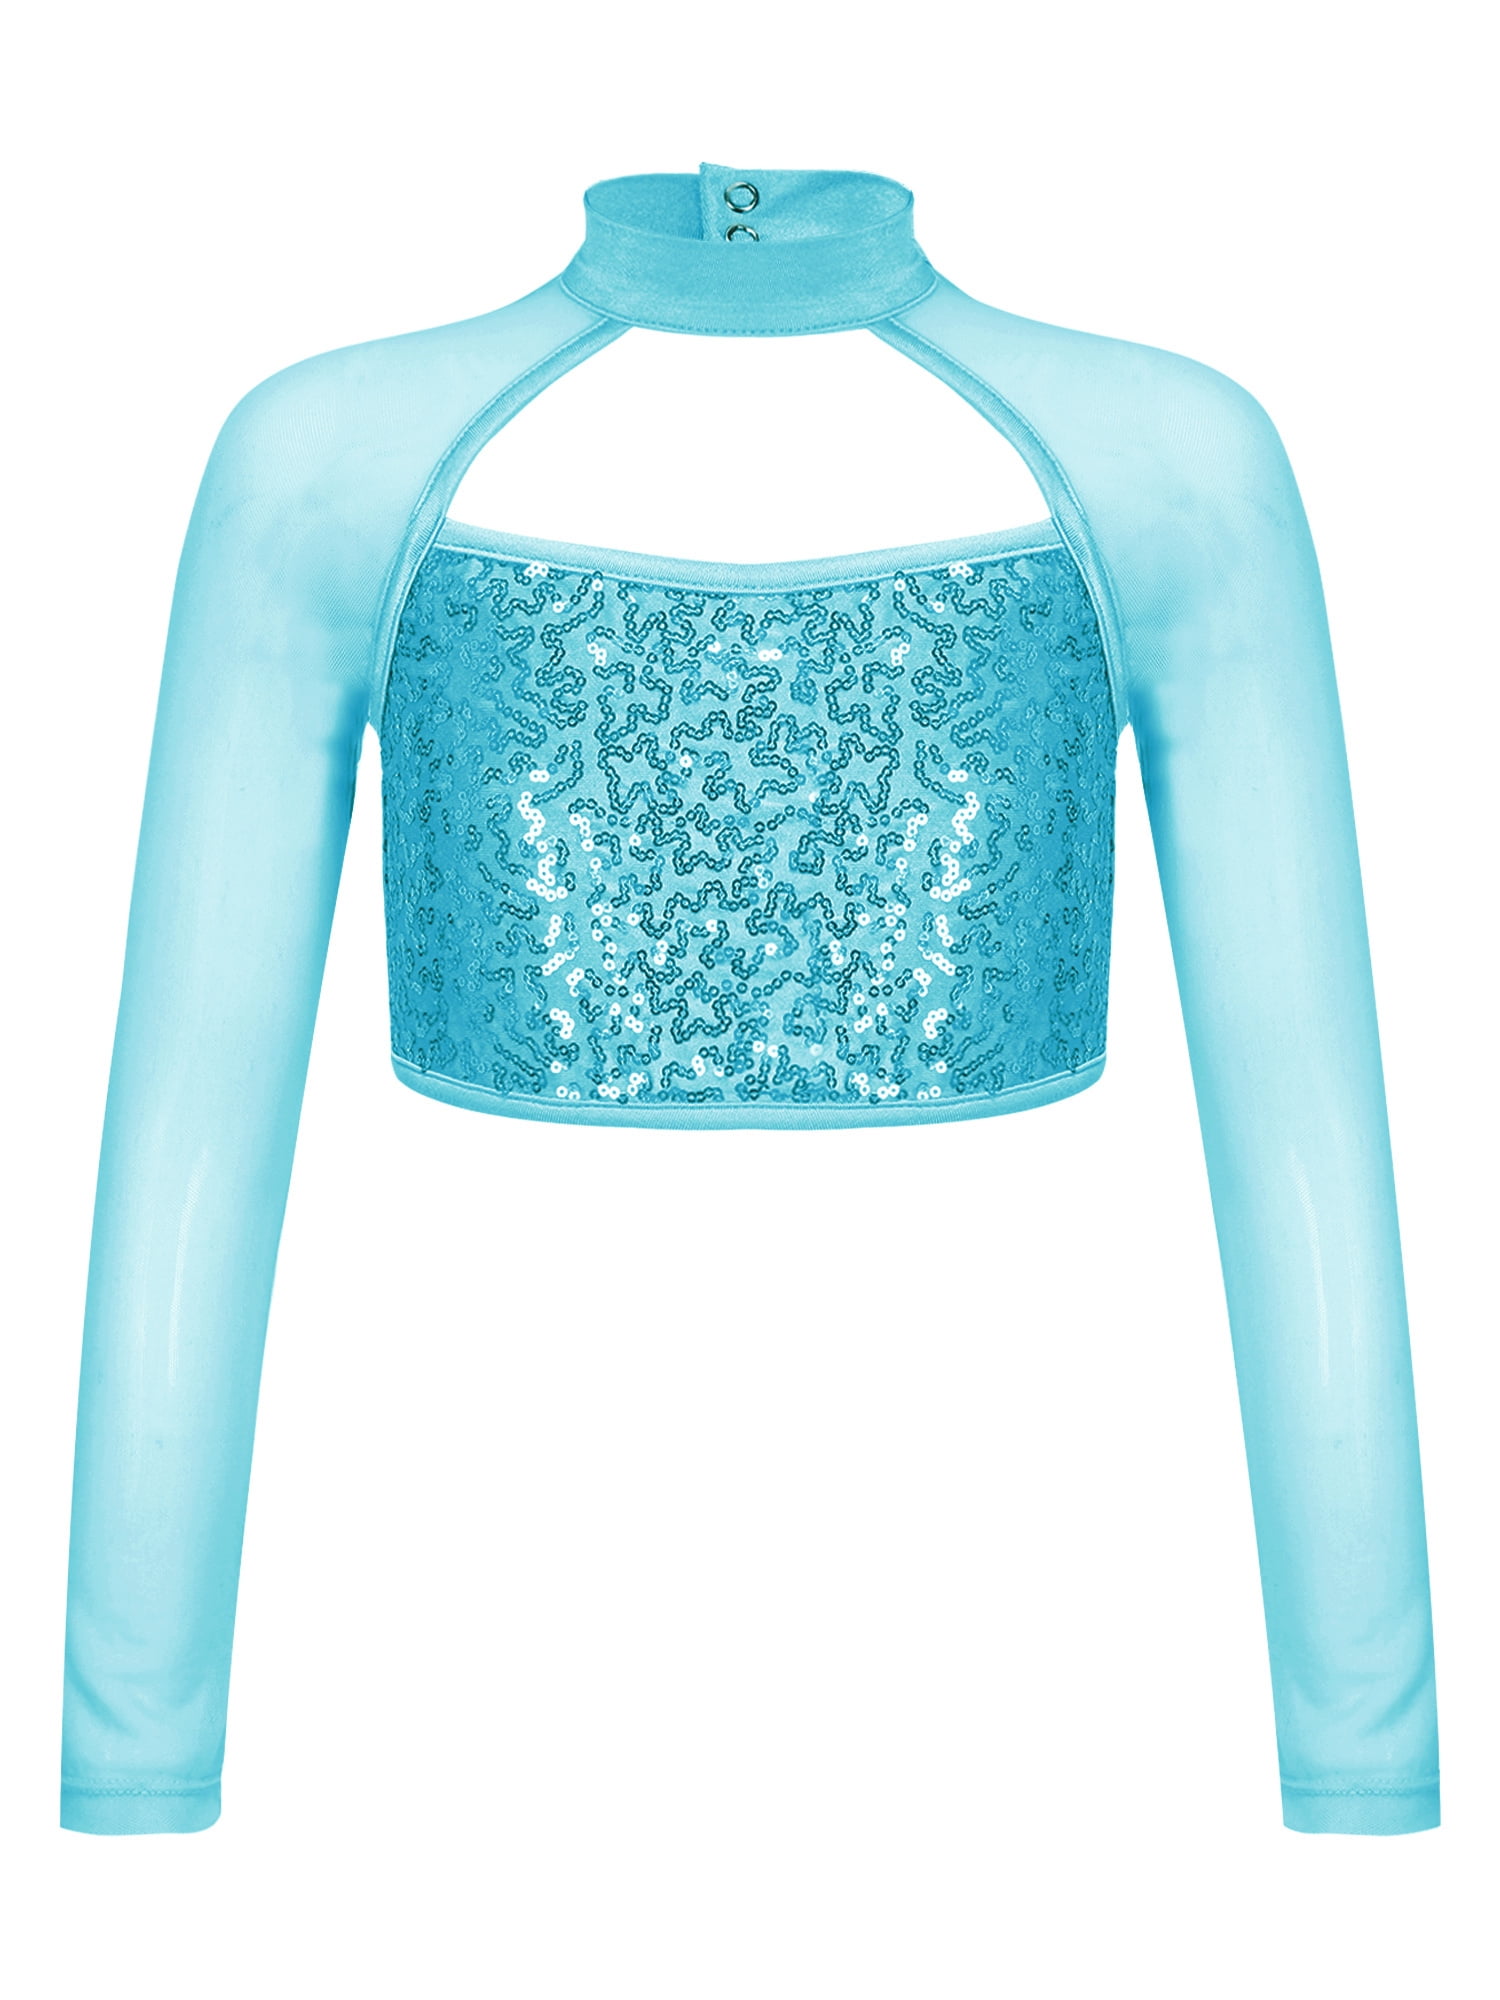 Chictry Shiny Sequins Crop Top For Girls Long Sleeve Ballet Modern